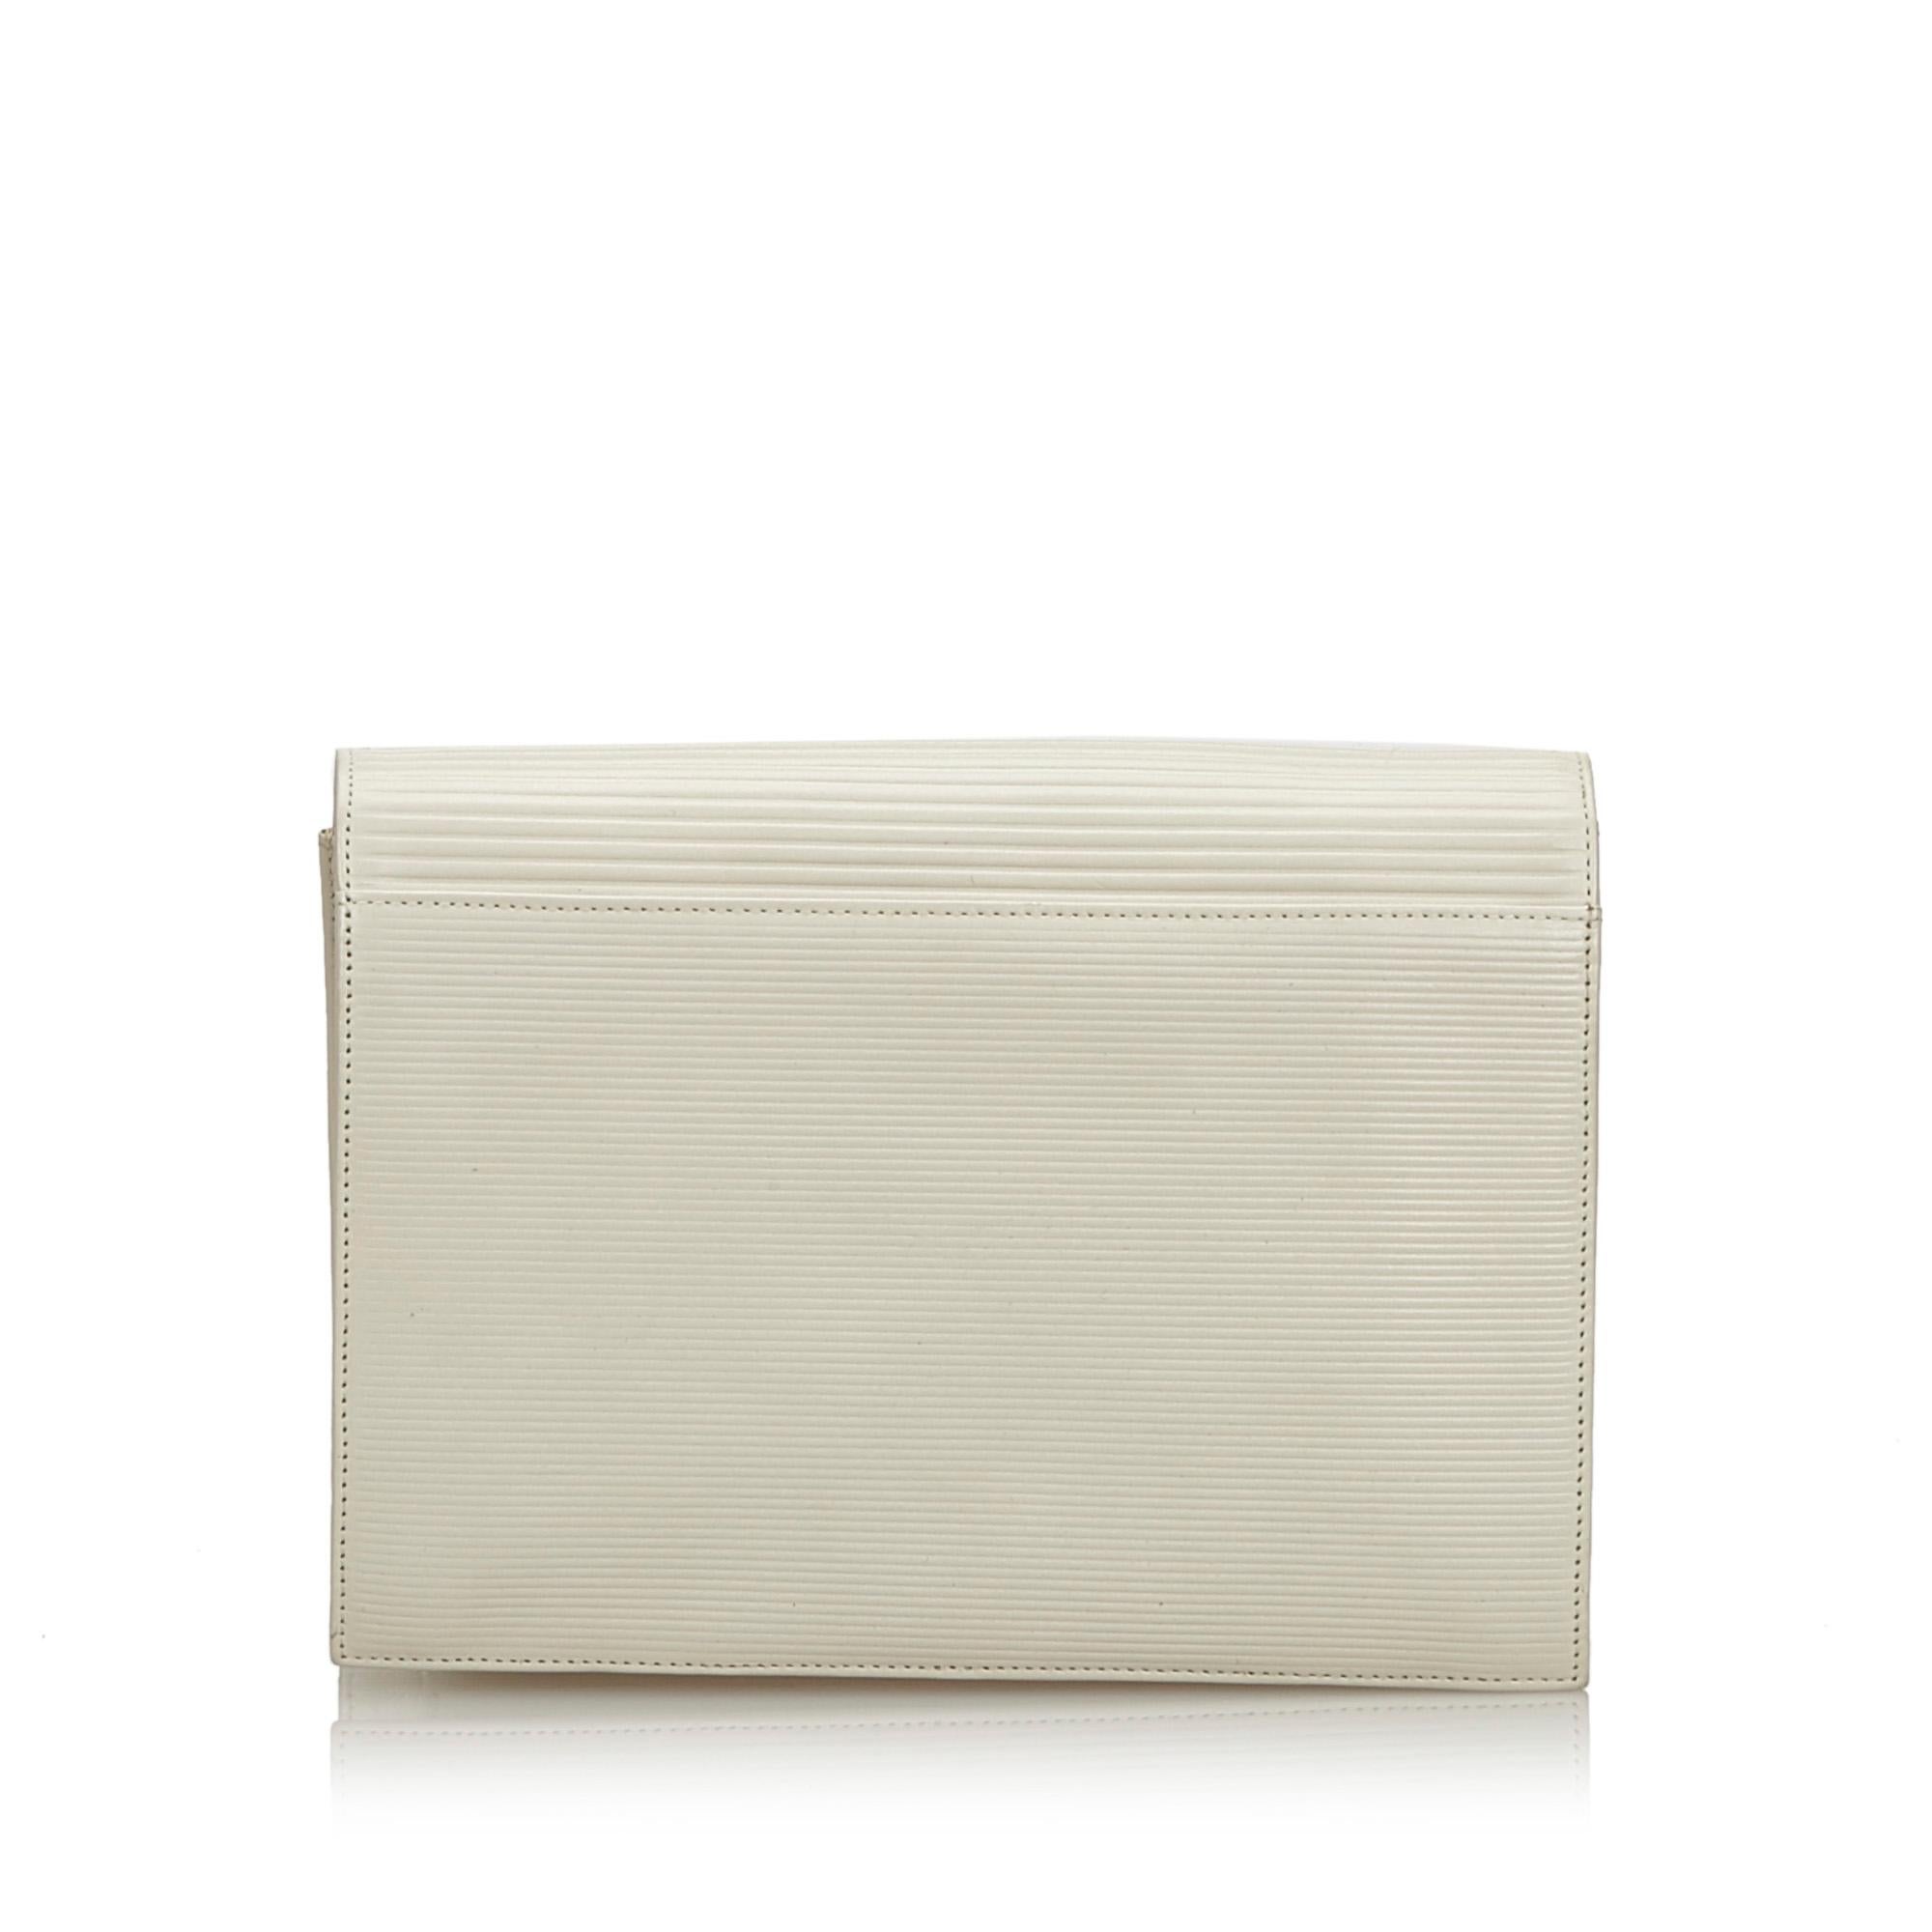 Vintage Authentic YSL White Leather Clutch Bag France SMALL  In Good Condition For Sale In Orlando, FL